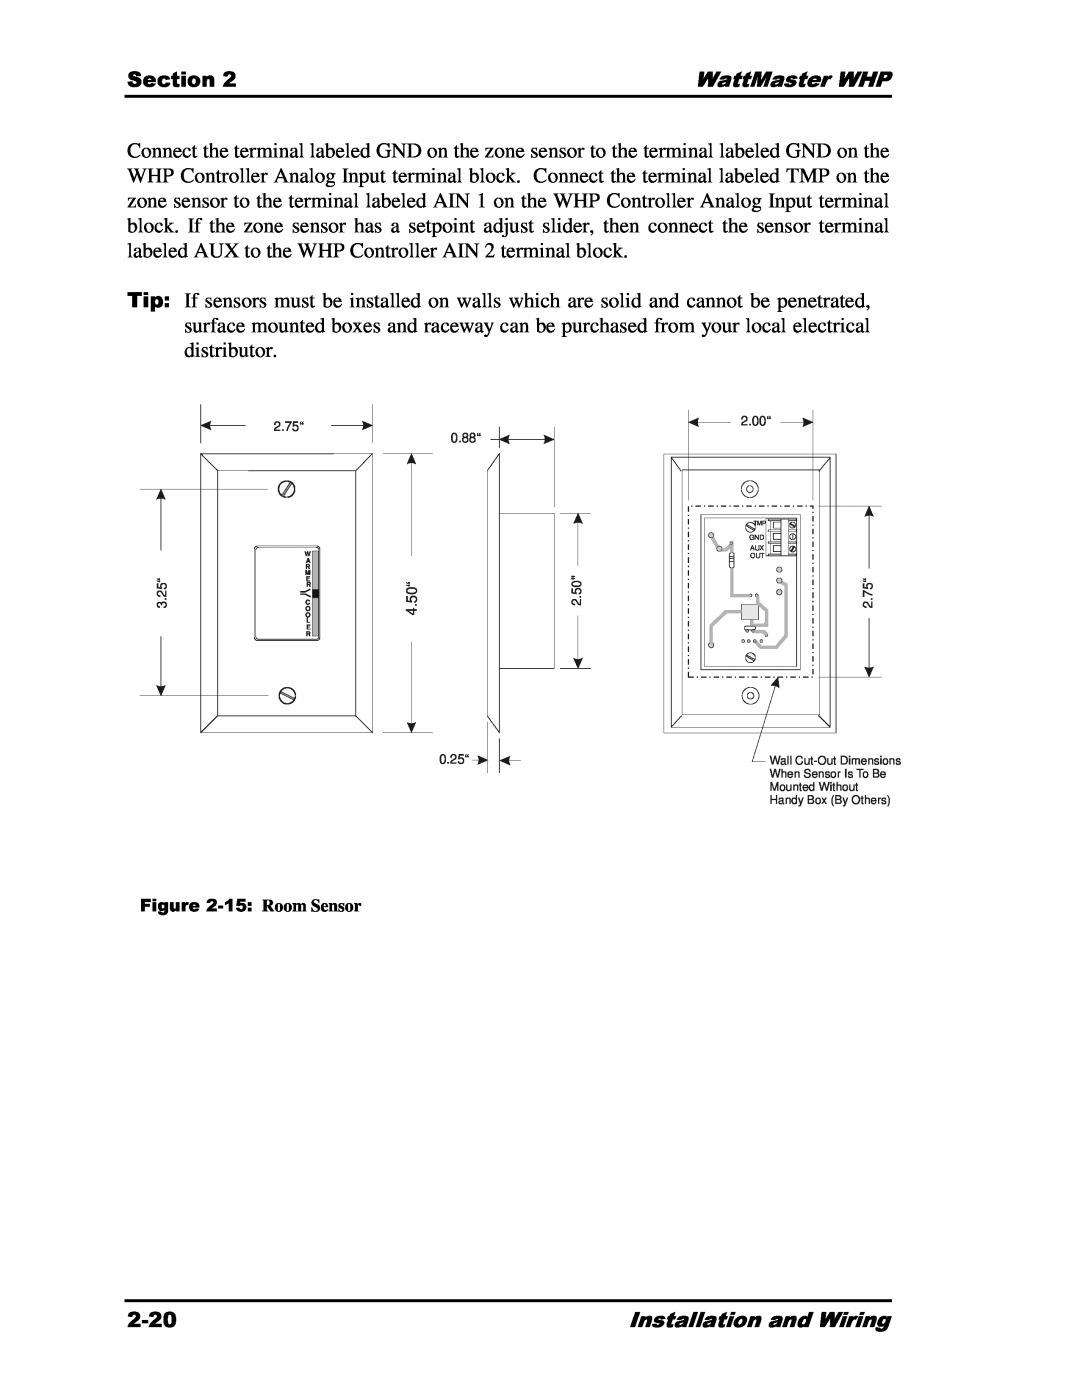 Heat Controller Water Source Heat Pump manual 15, Section, WattMaster WHP, 2-20, Installation and Wiring 